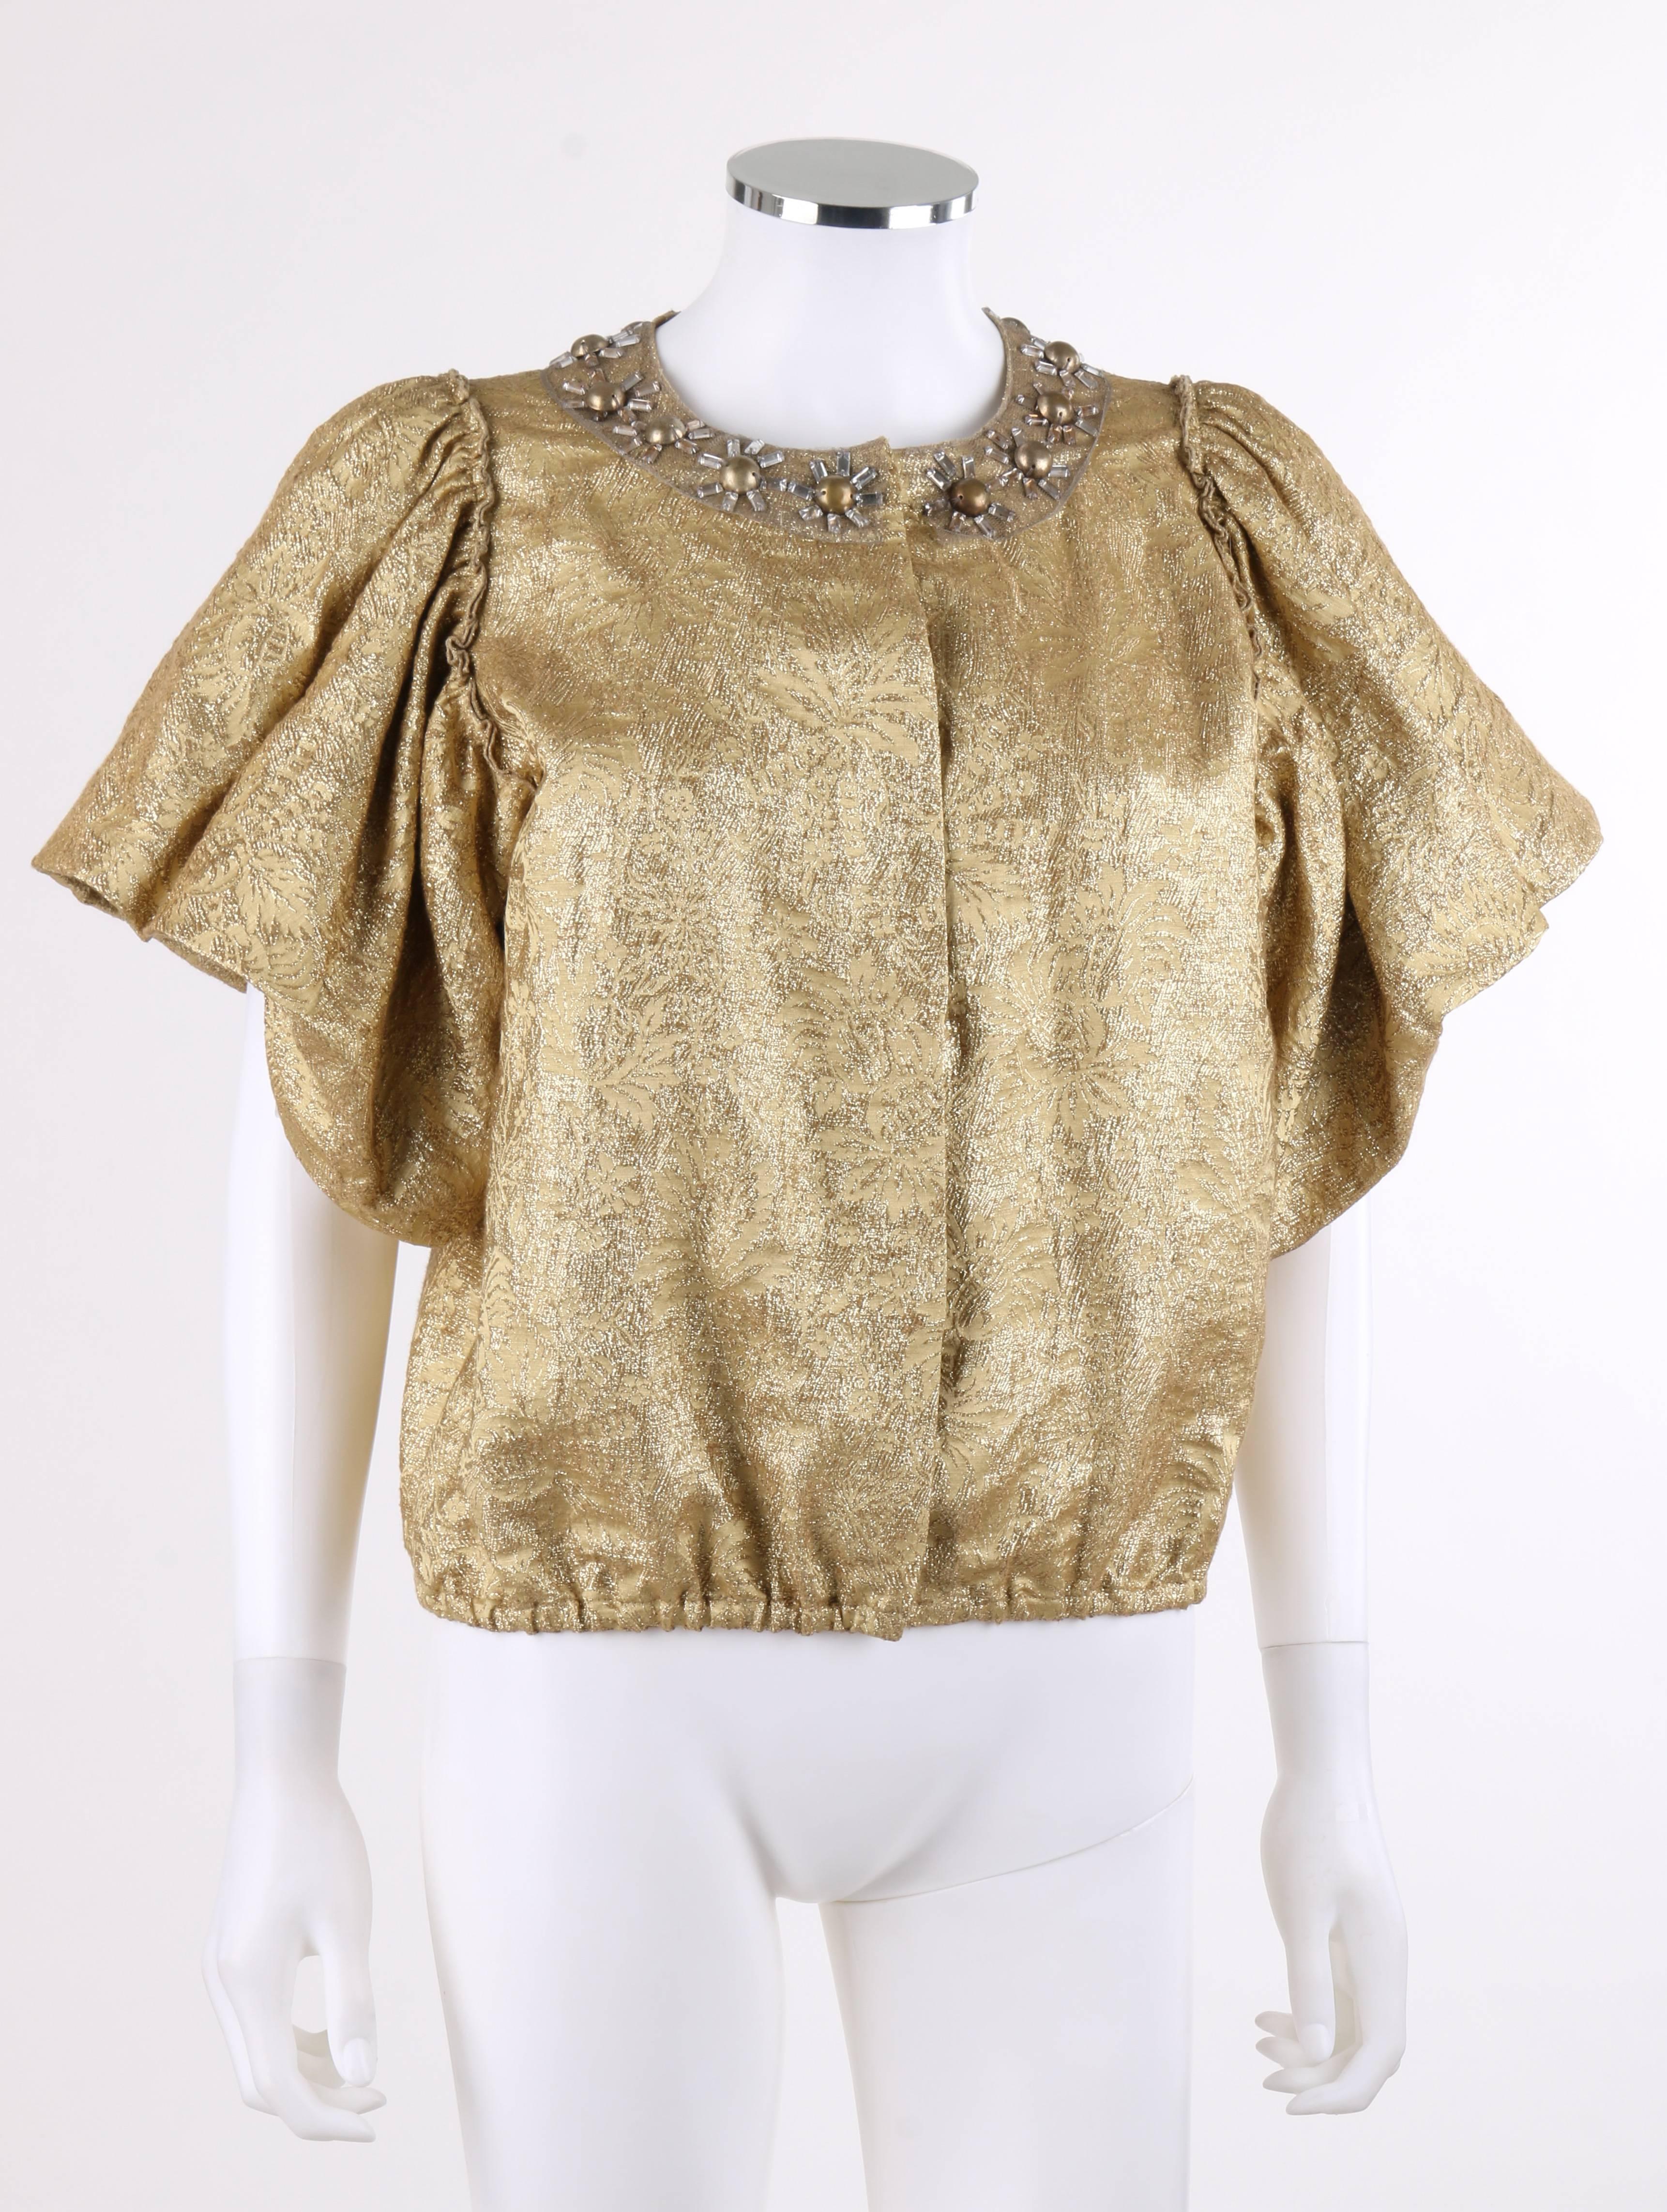 Lanvin Spring/Summer 2007 metallic gold silk floral brocade jacket designed by Alber Elbaz. Short flounced sleeves with bubble hem. Crew neckline. Clear rectangular rhinestone and gold-toned domed bead embellishment in floral/sunburst shape over